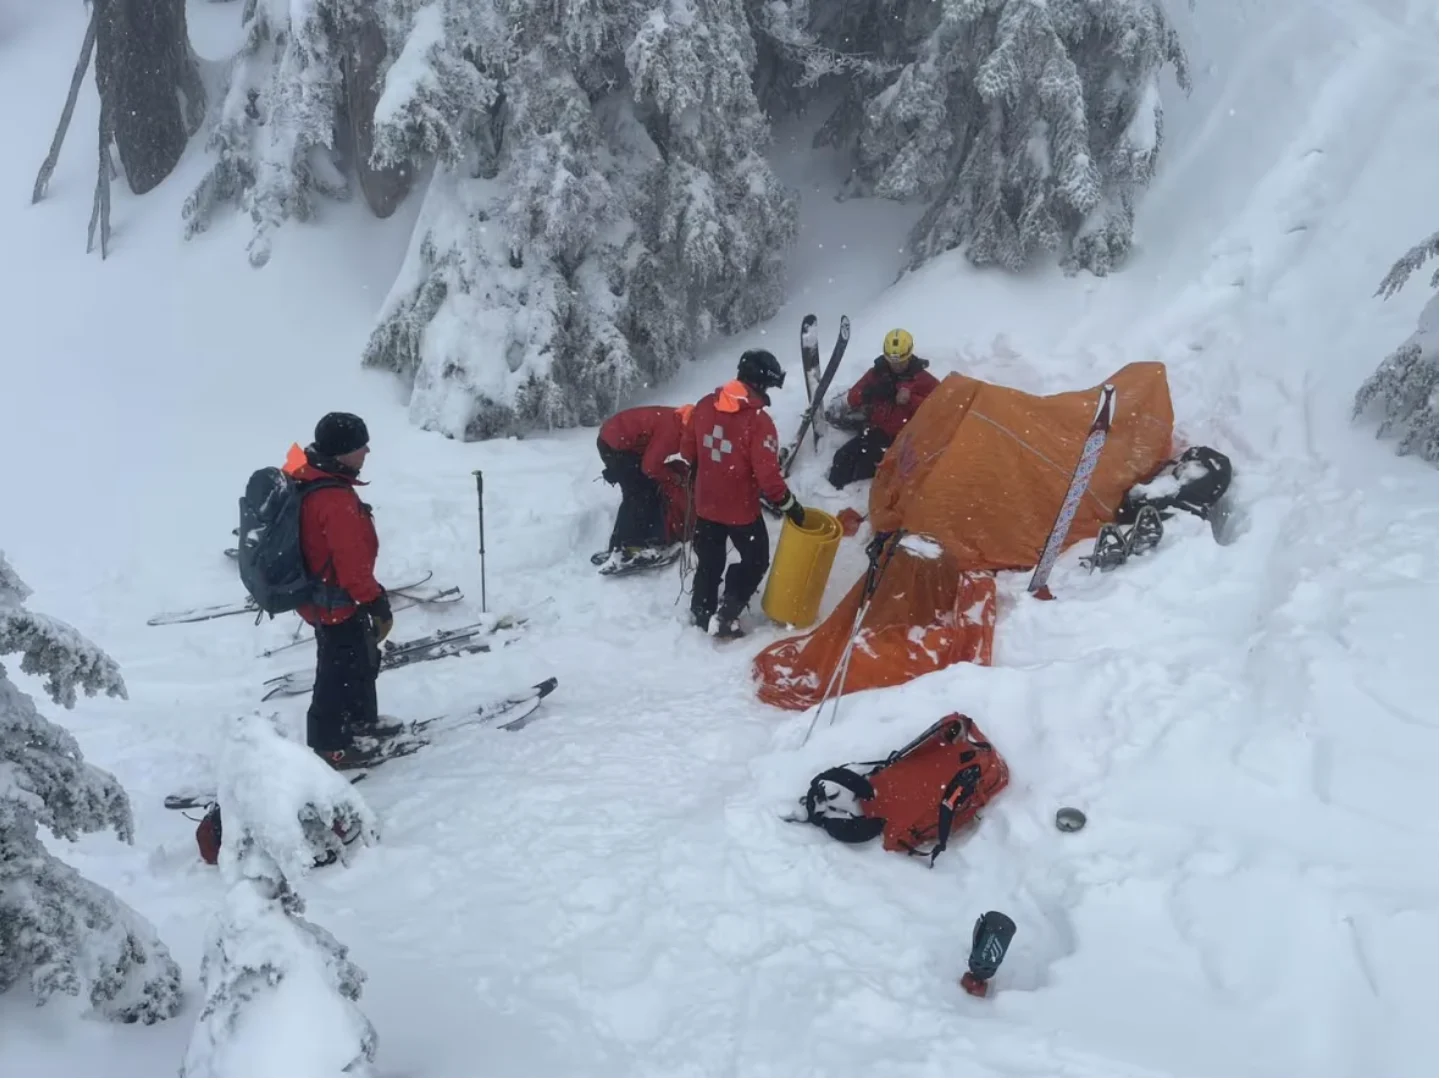 CBC: NSR says the man was able to hike back down the mountain himself, but the woman required support getting down. They said the woman had recovered enough to leave with her husband when they reached the base of Mount Seymour. (North Shore Rescue)